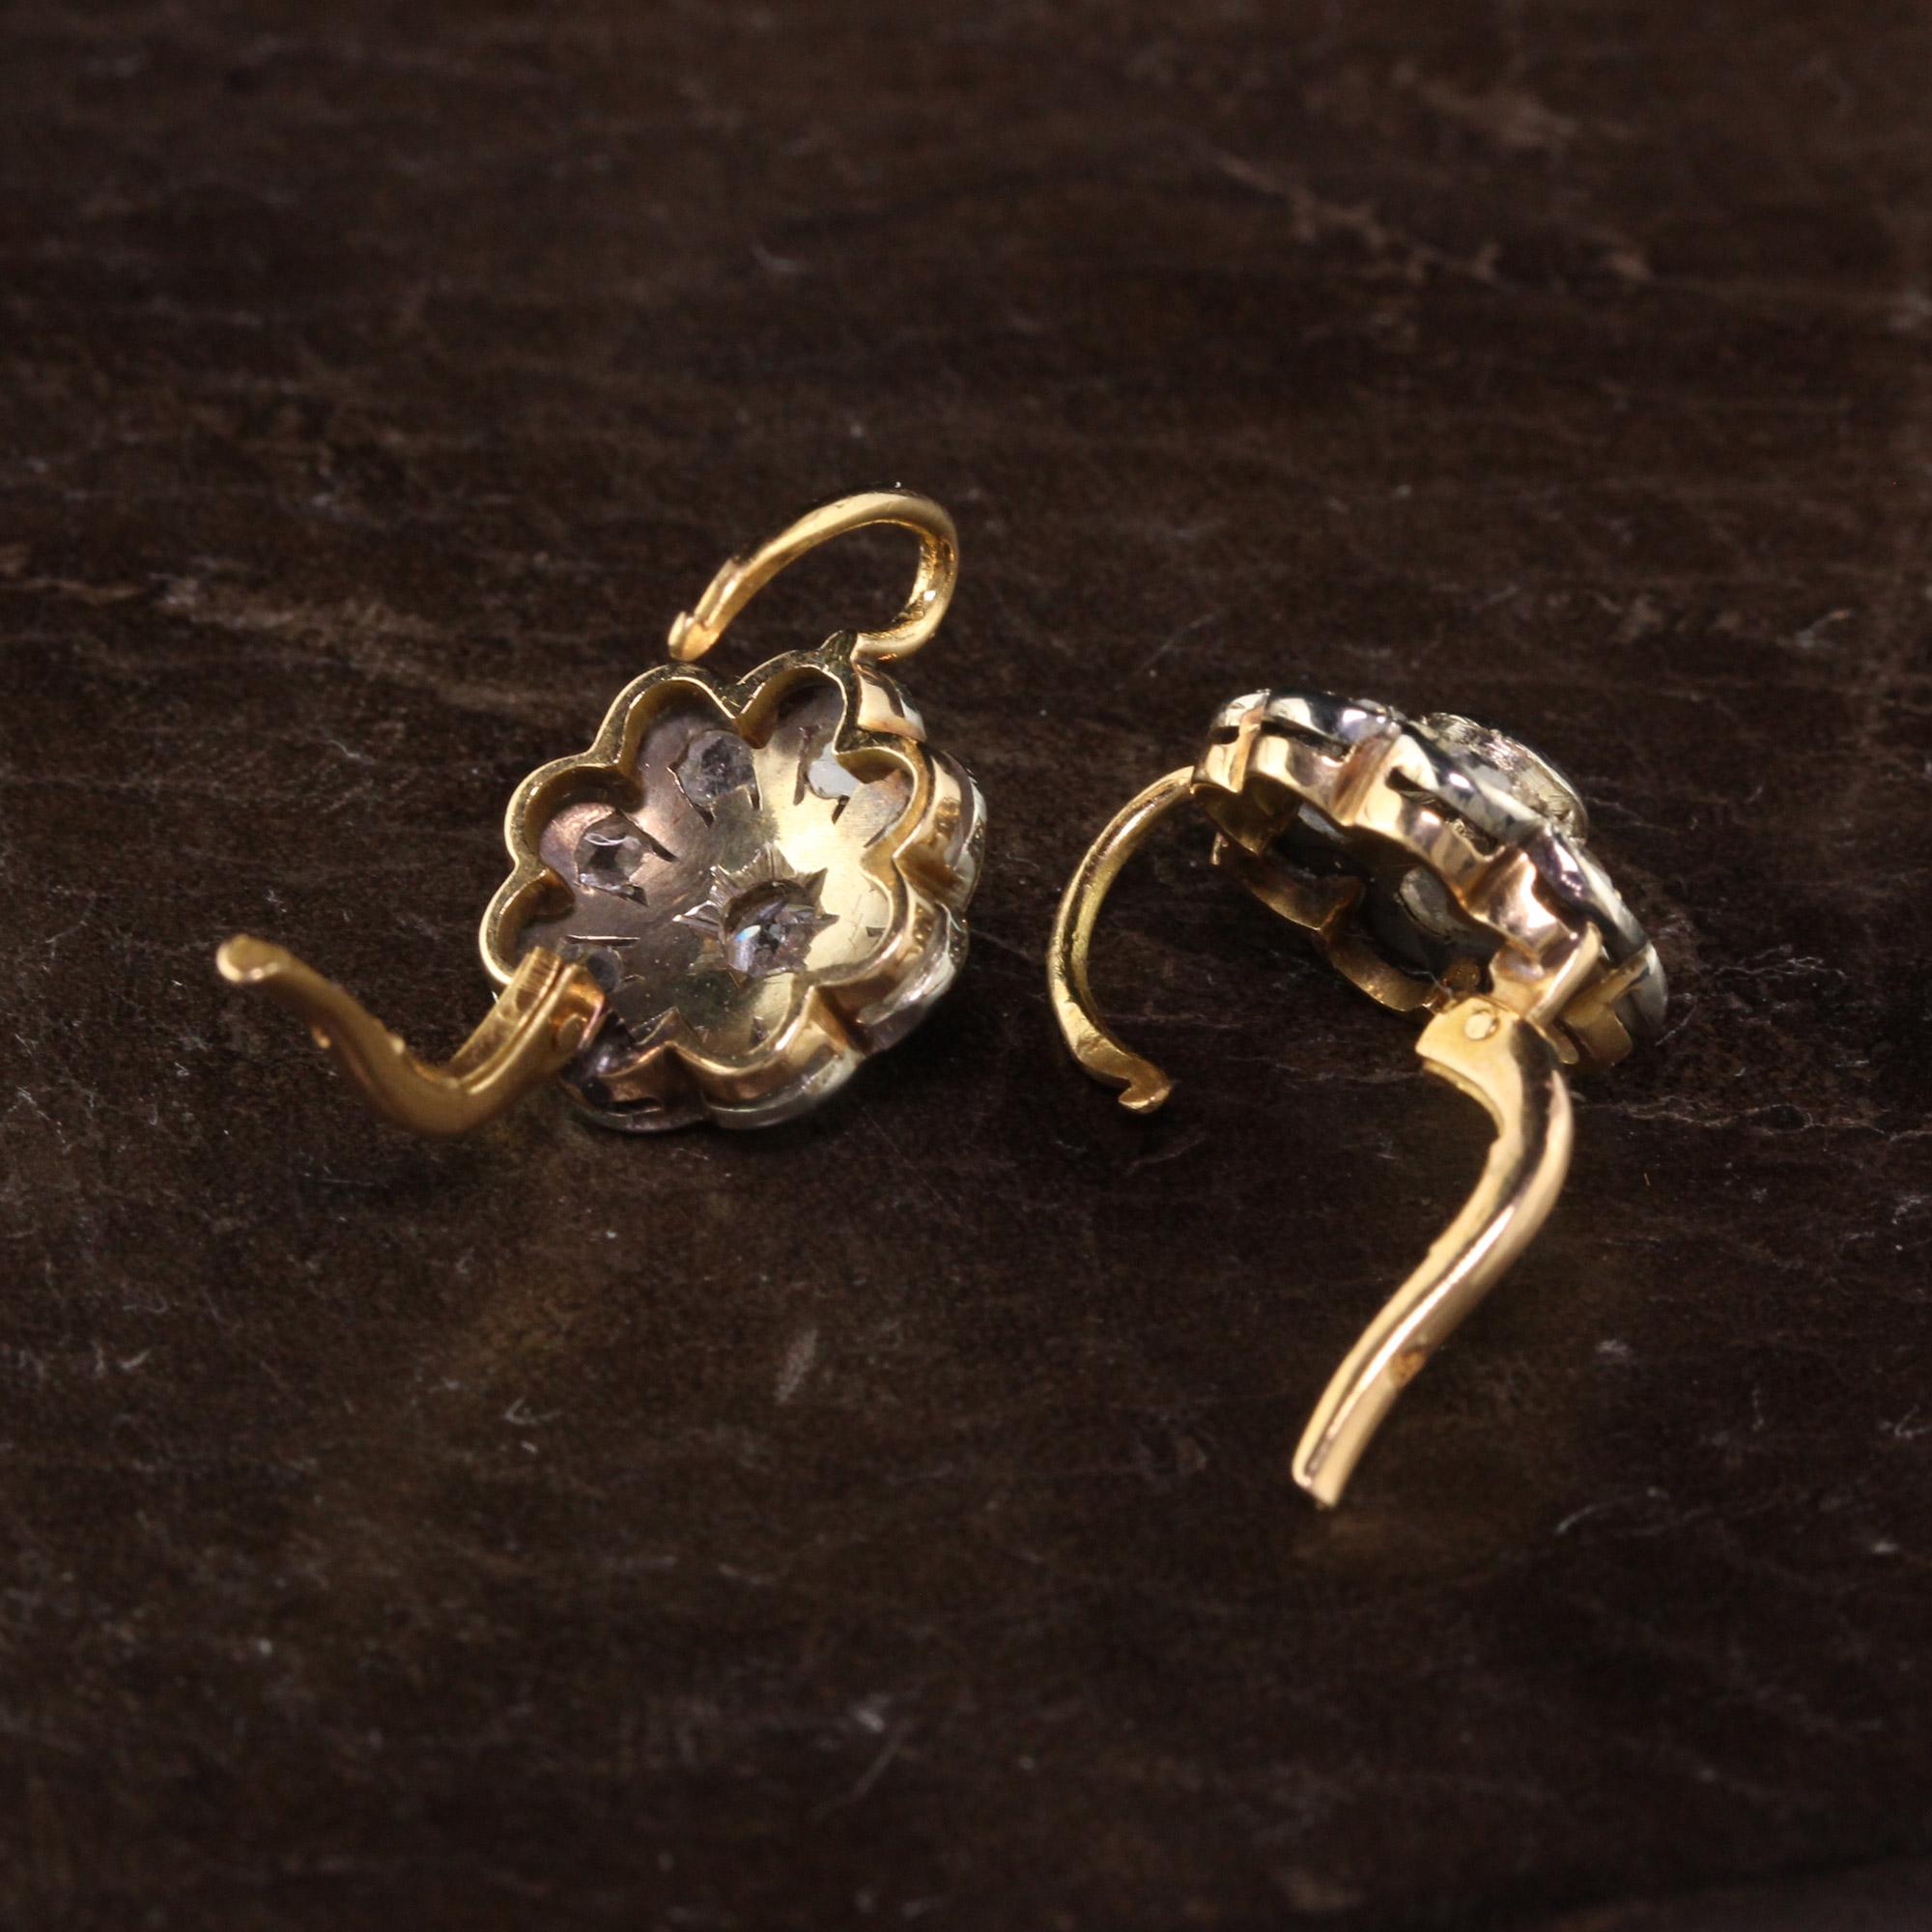 A gorgeous Antique Victorian 18K Yellow Gold Platinum Top Diamond Cluster Earrings. The center of the earrings have an old european cut diamond and they are surrounded by rose cut diamonds. The earrings are in great condition and sit well on the